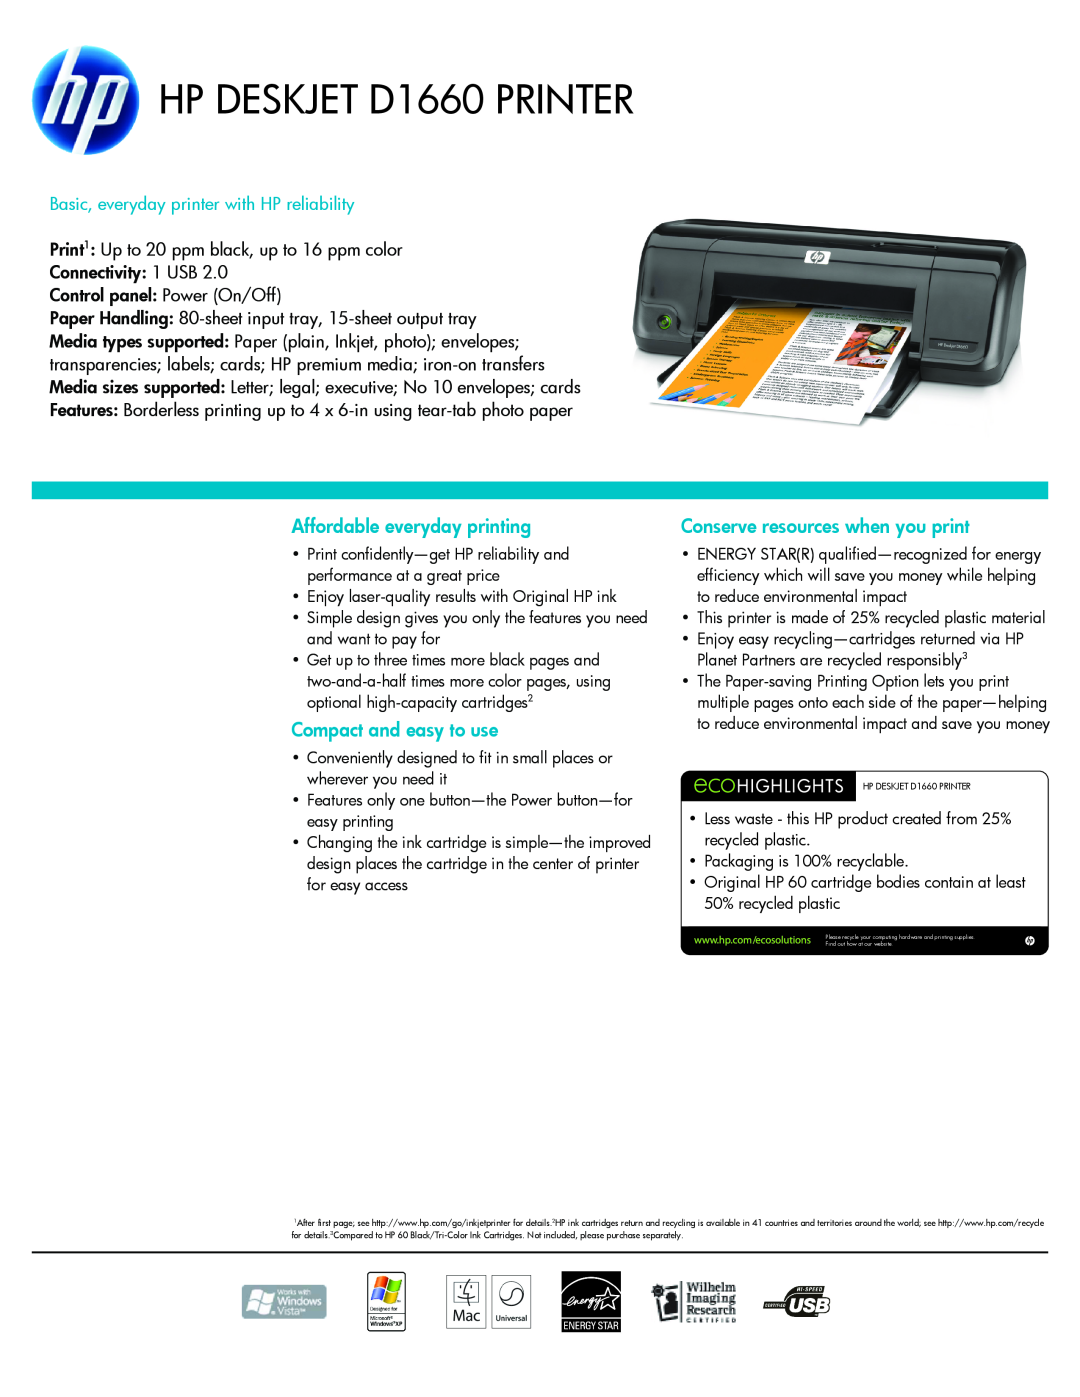 HP manual HP DESKJET D1660 PRINTER, Affordable everyday printing, Compact and easy to use, Control panel Power On/Off 